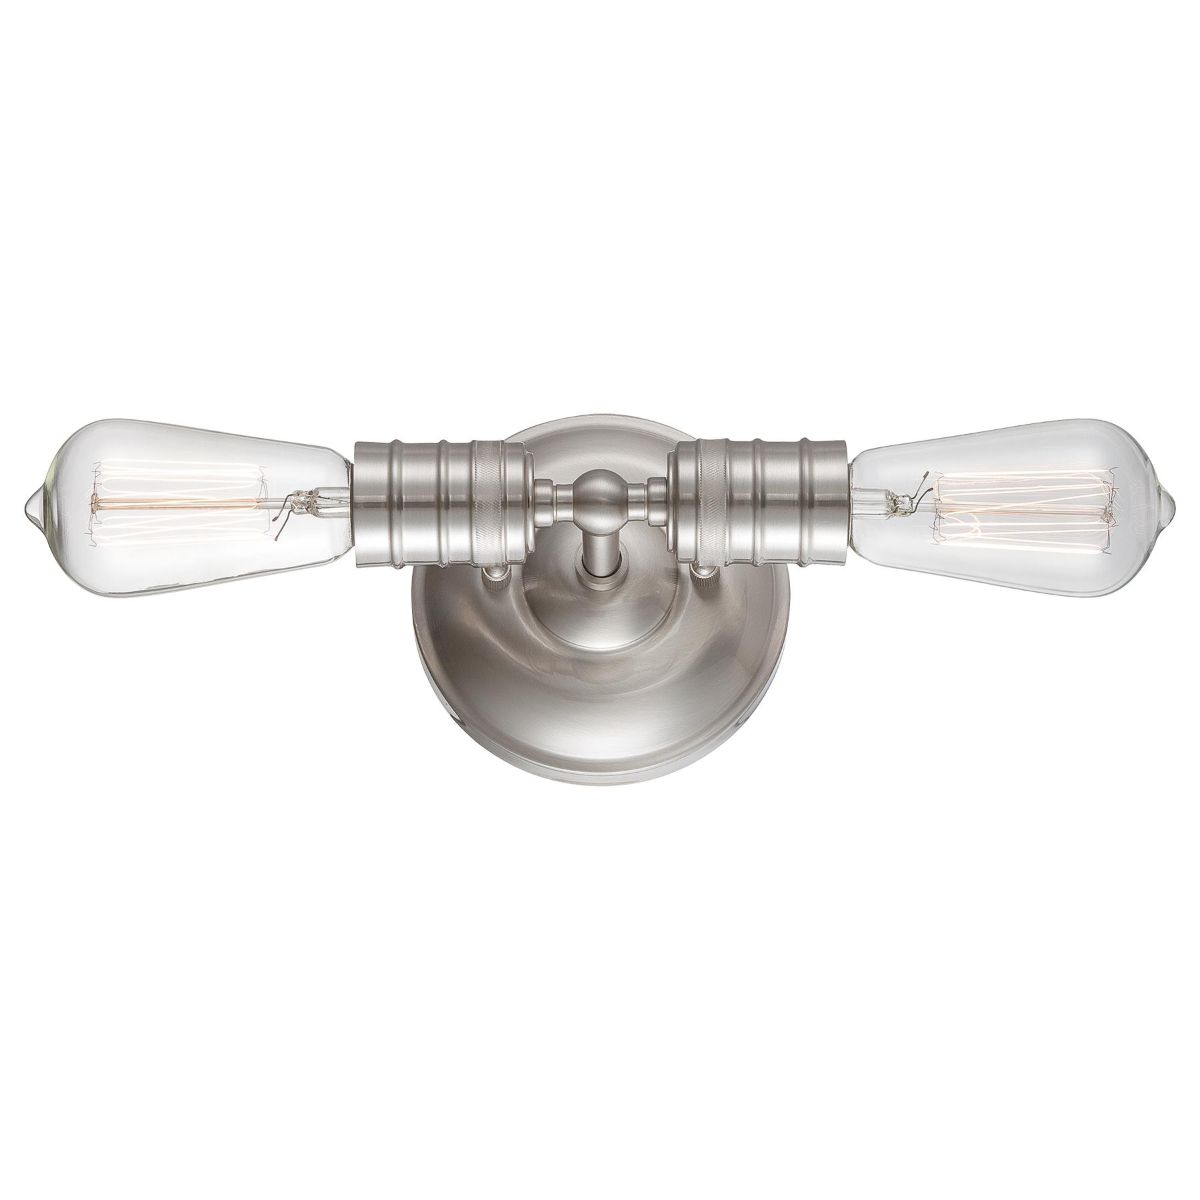 Downtown Edison 6 in. Armed Sconce Polished Nickel finish